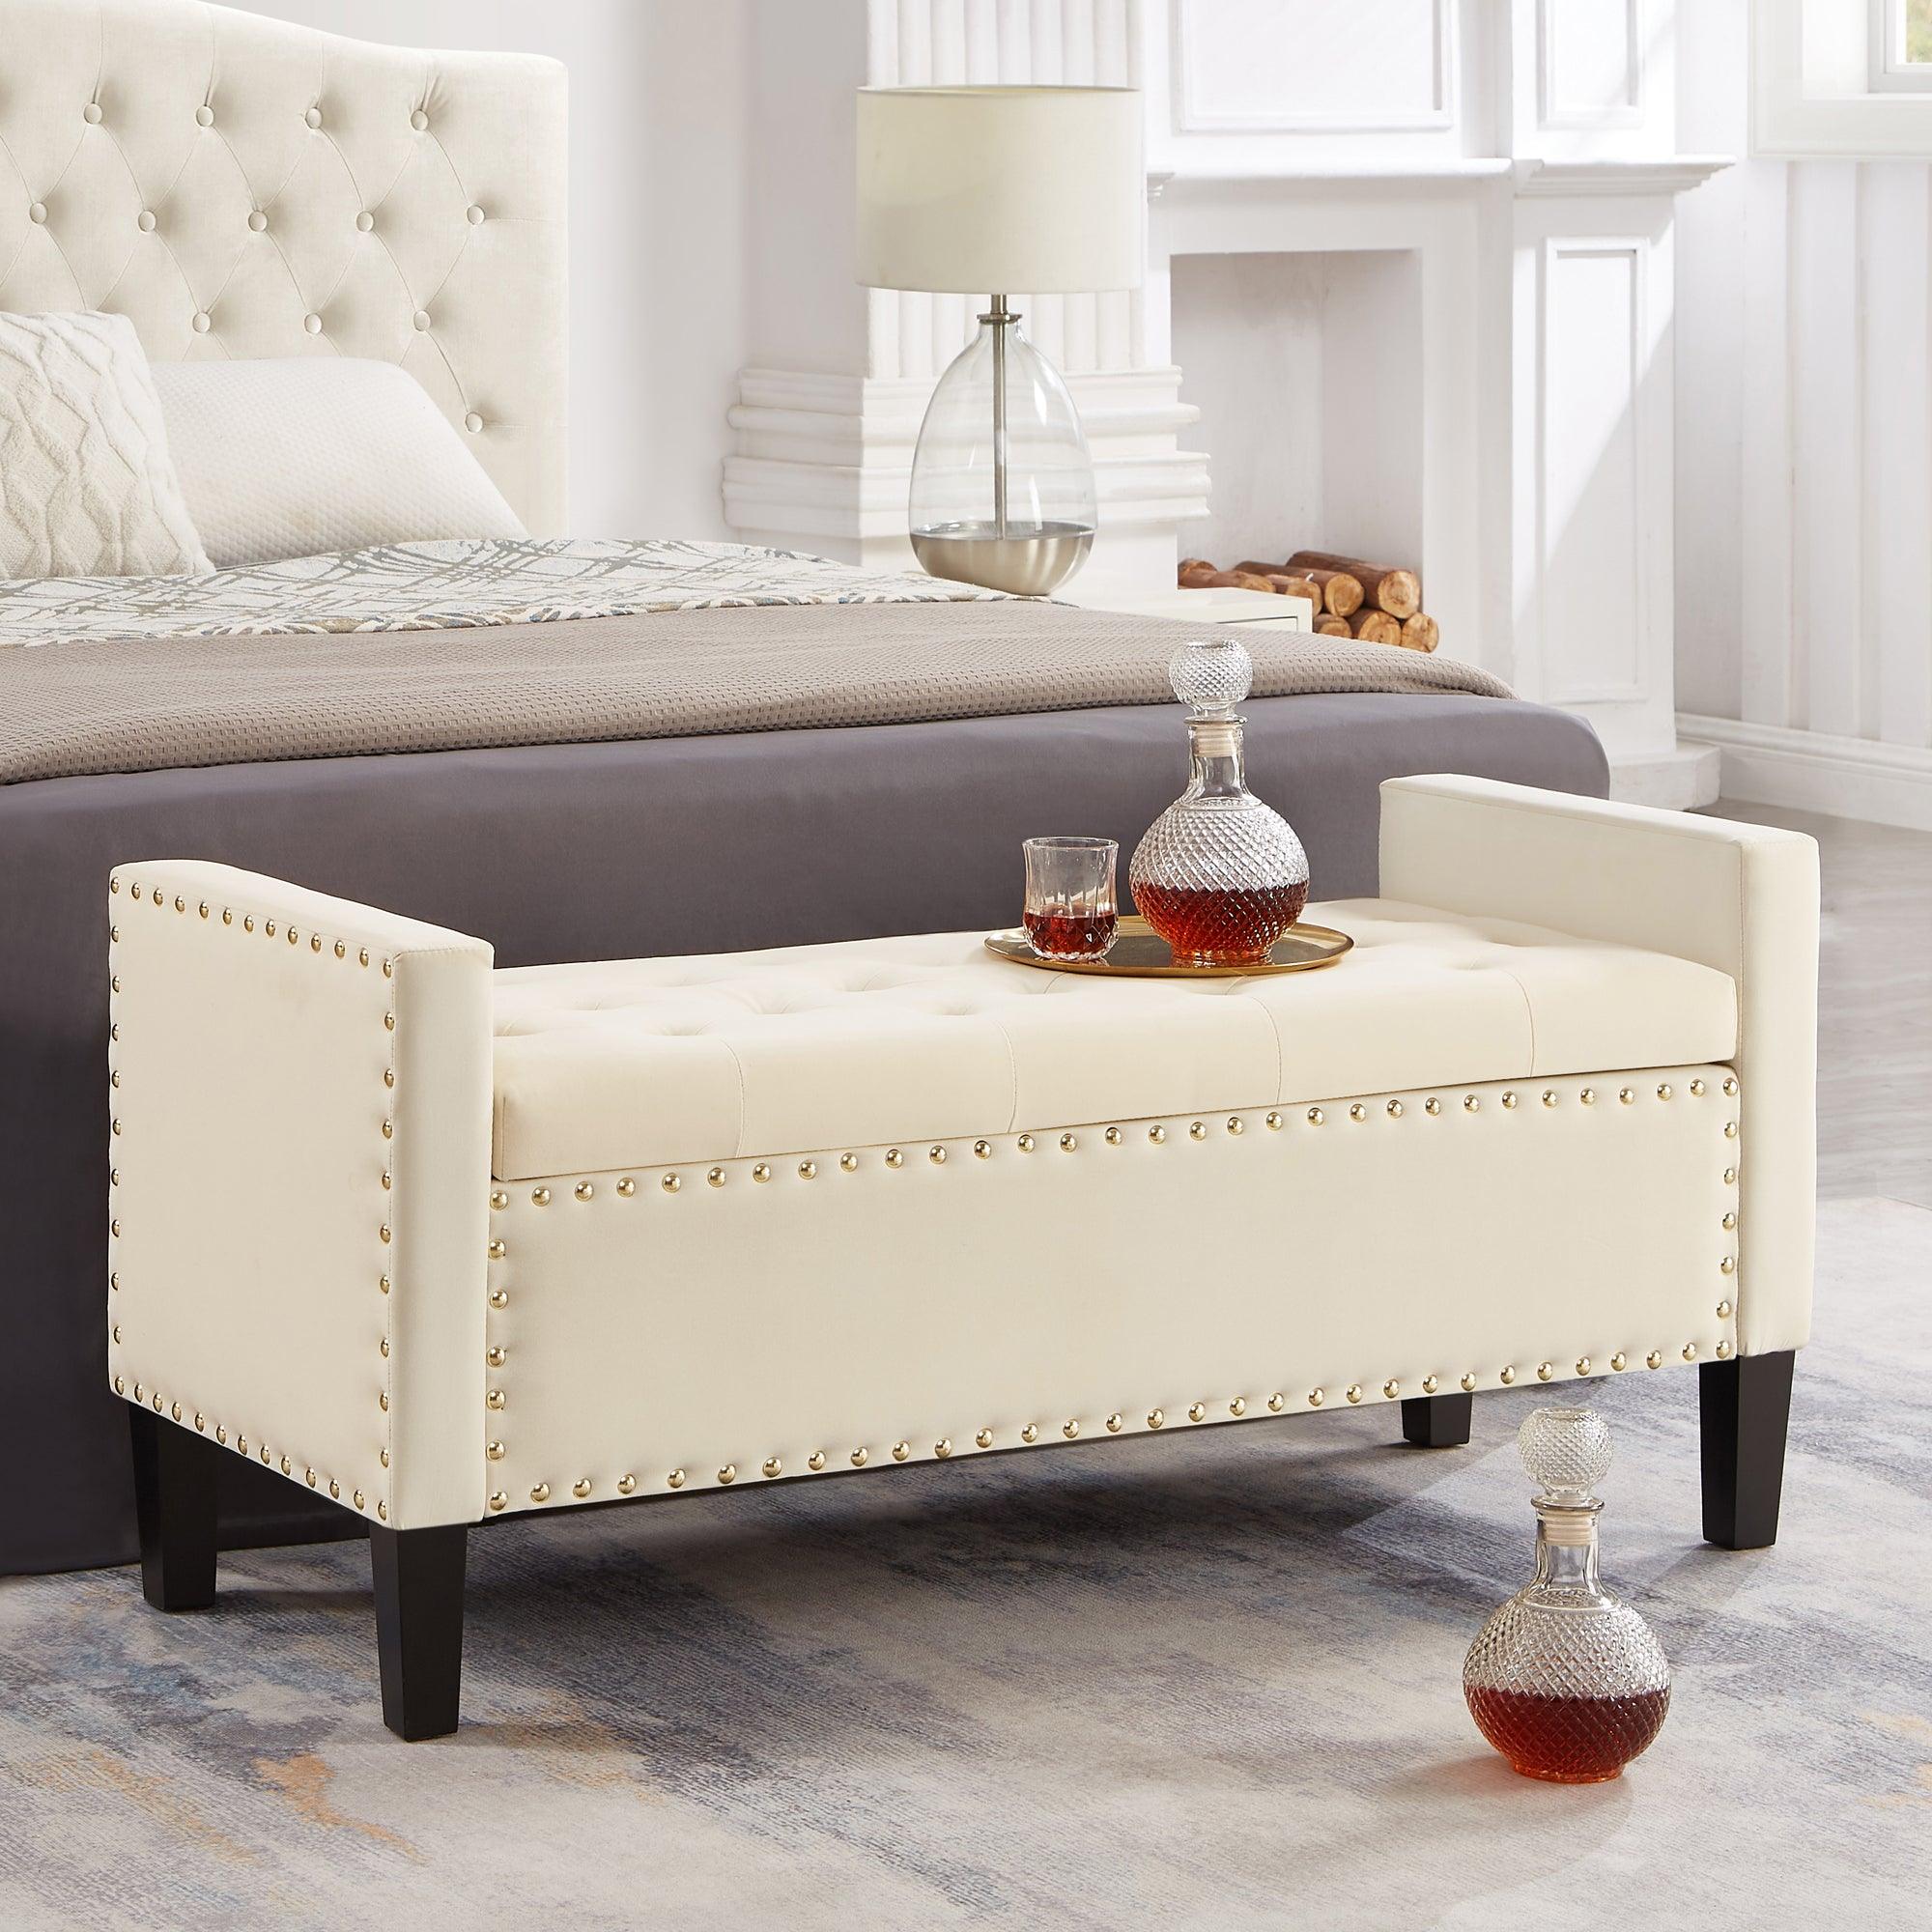 🆓🚛 Upholstered Tufted Button Storage Bench With Nails Trim, Entryway Living Room Soft Padded Seat With Armrest, Bed Bench, Cream